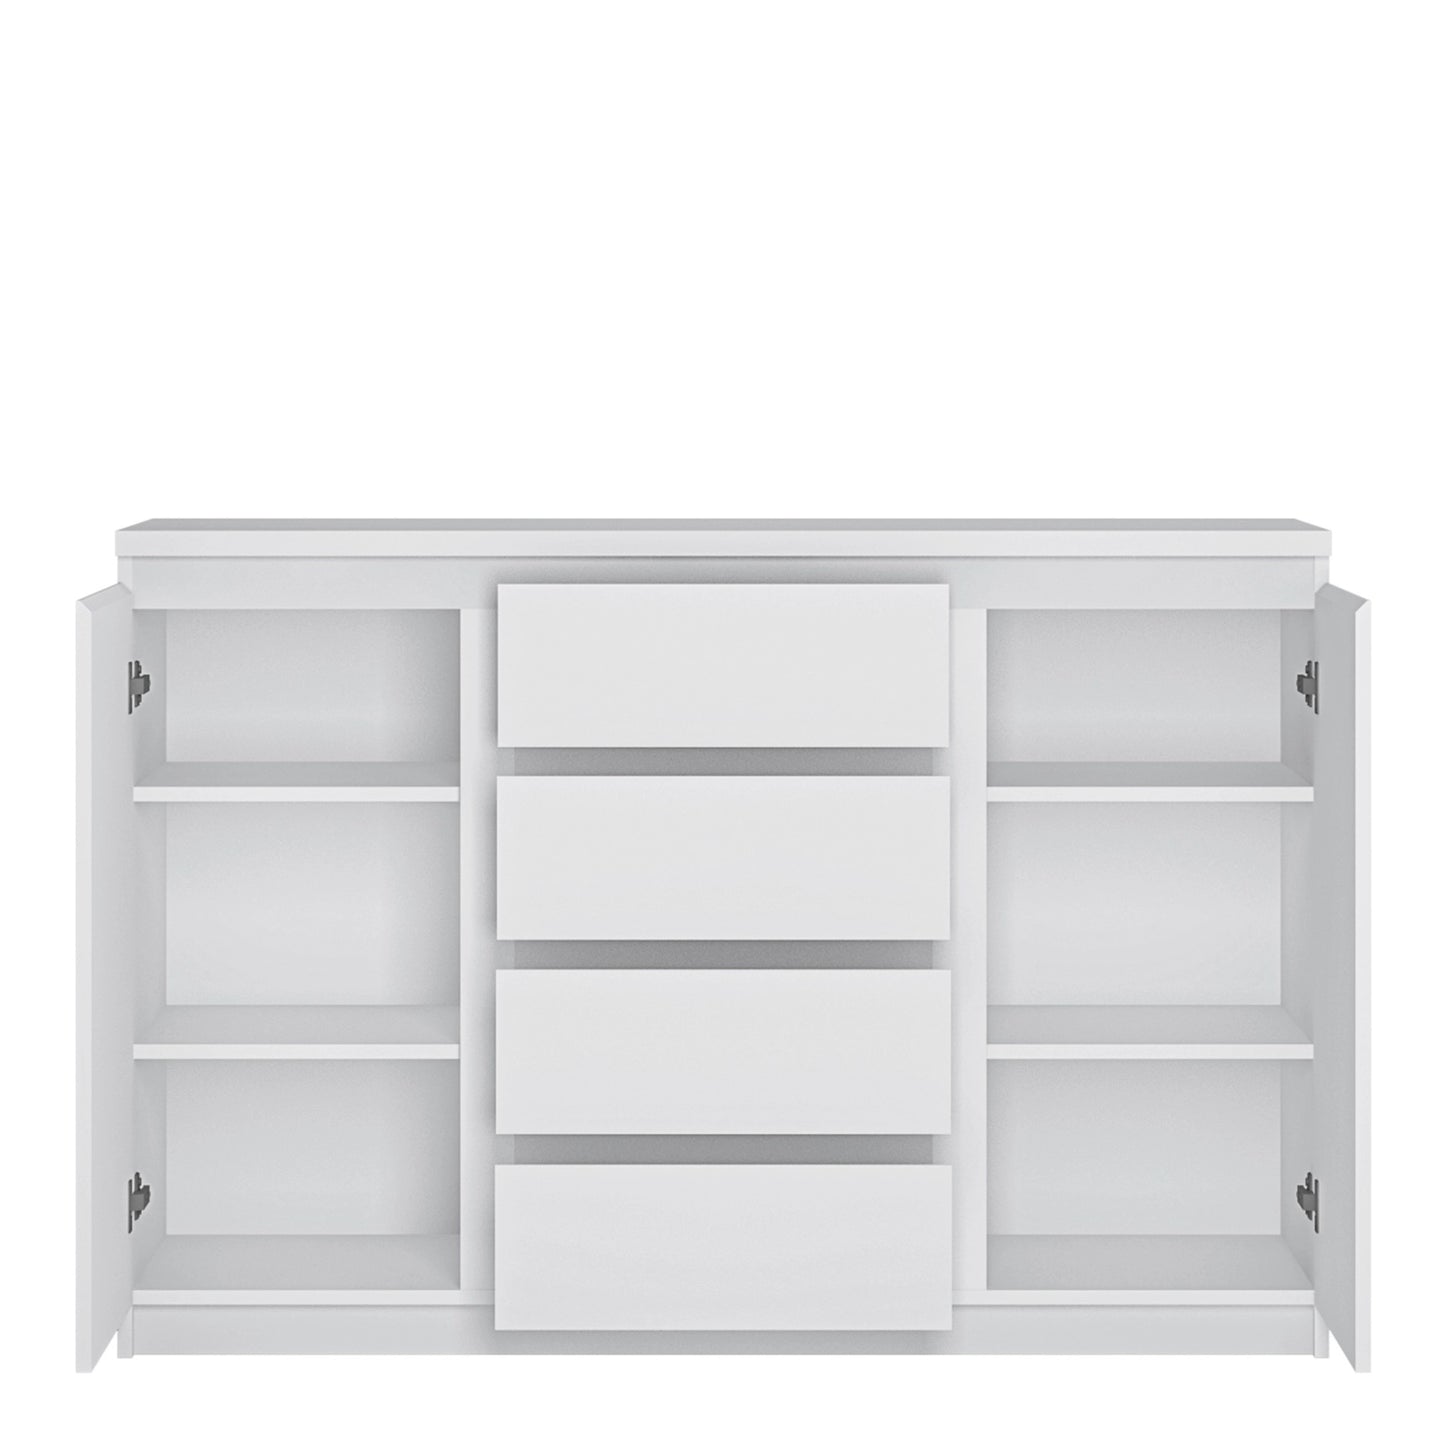 Furniture To Go Fribo 2 Door 4 Drawer Sideboard in White